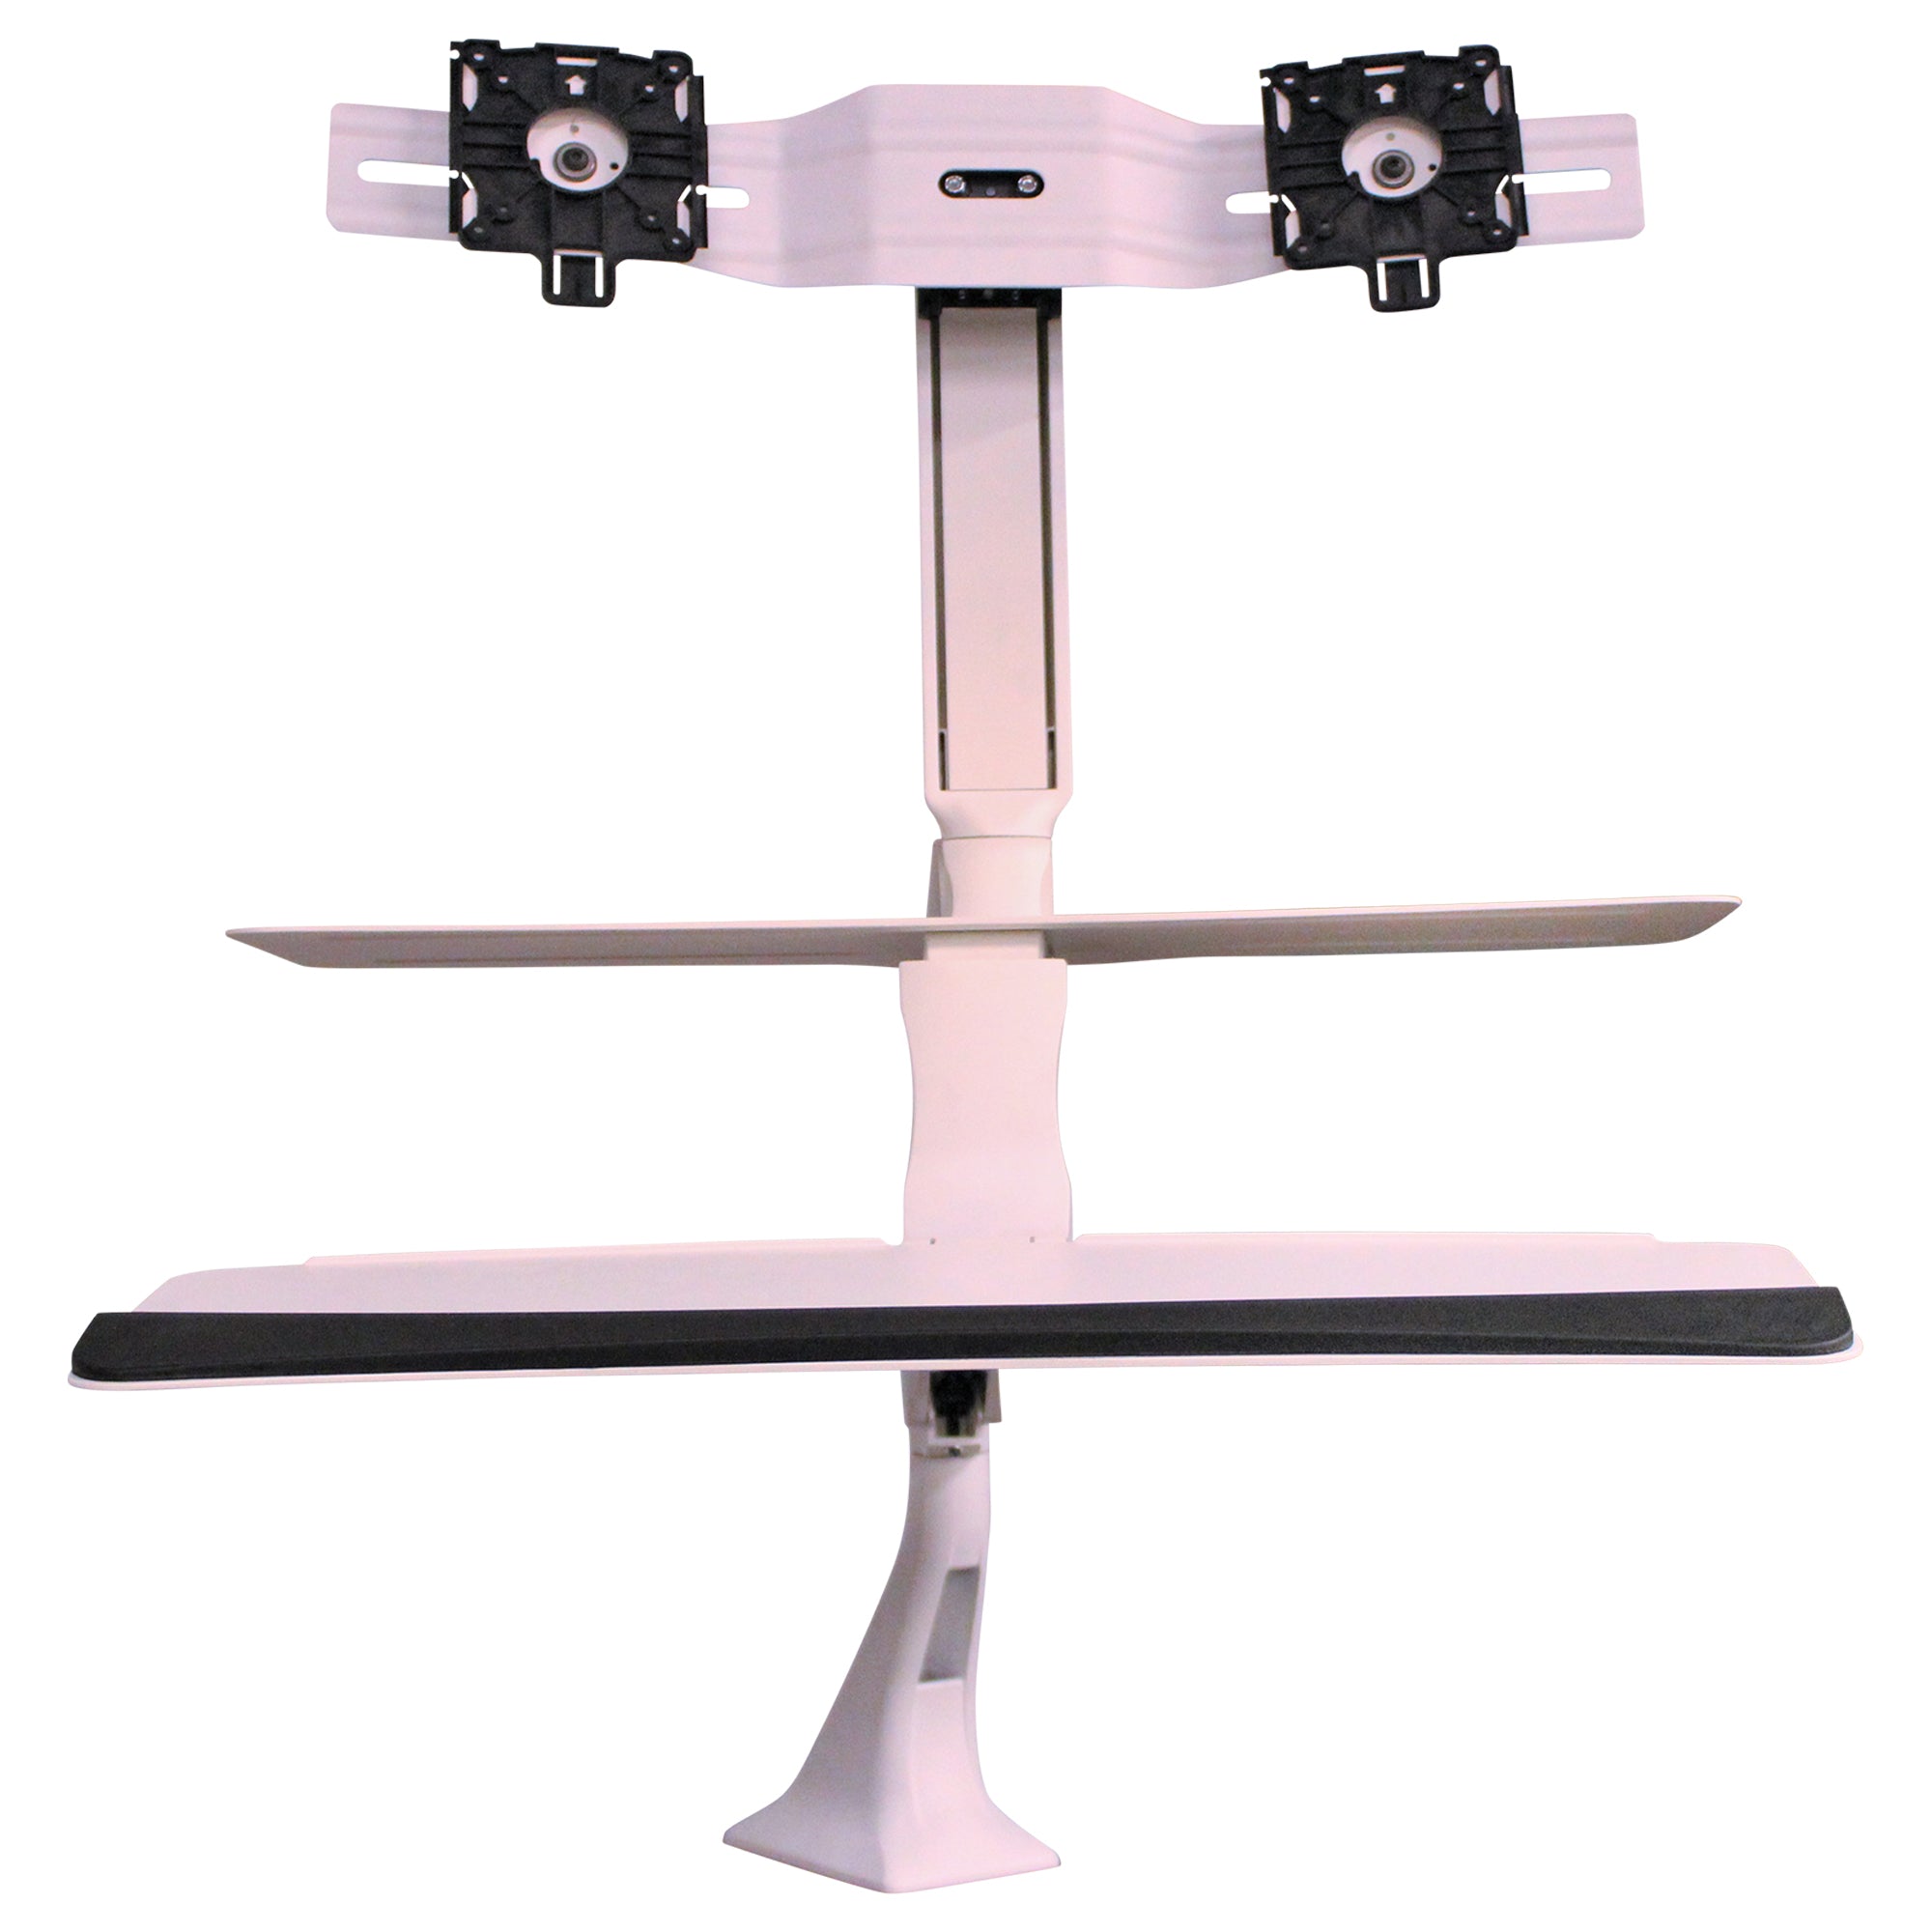 Altissimo Dual Sit-Stand Workstation, White - New CLOSEOUT